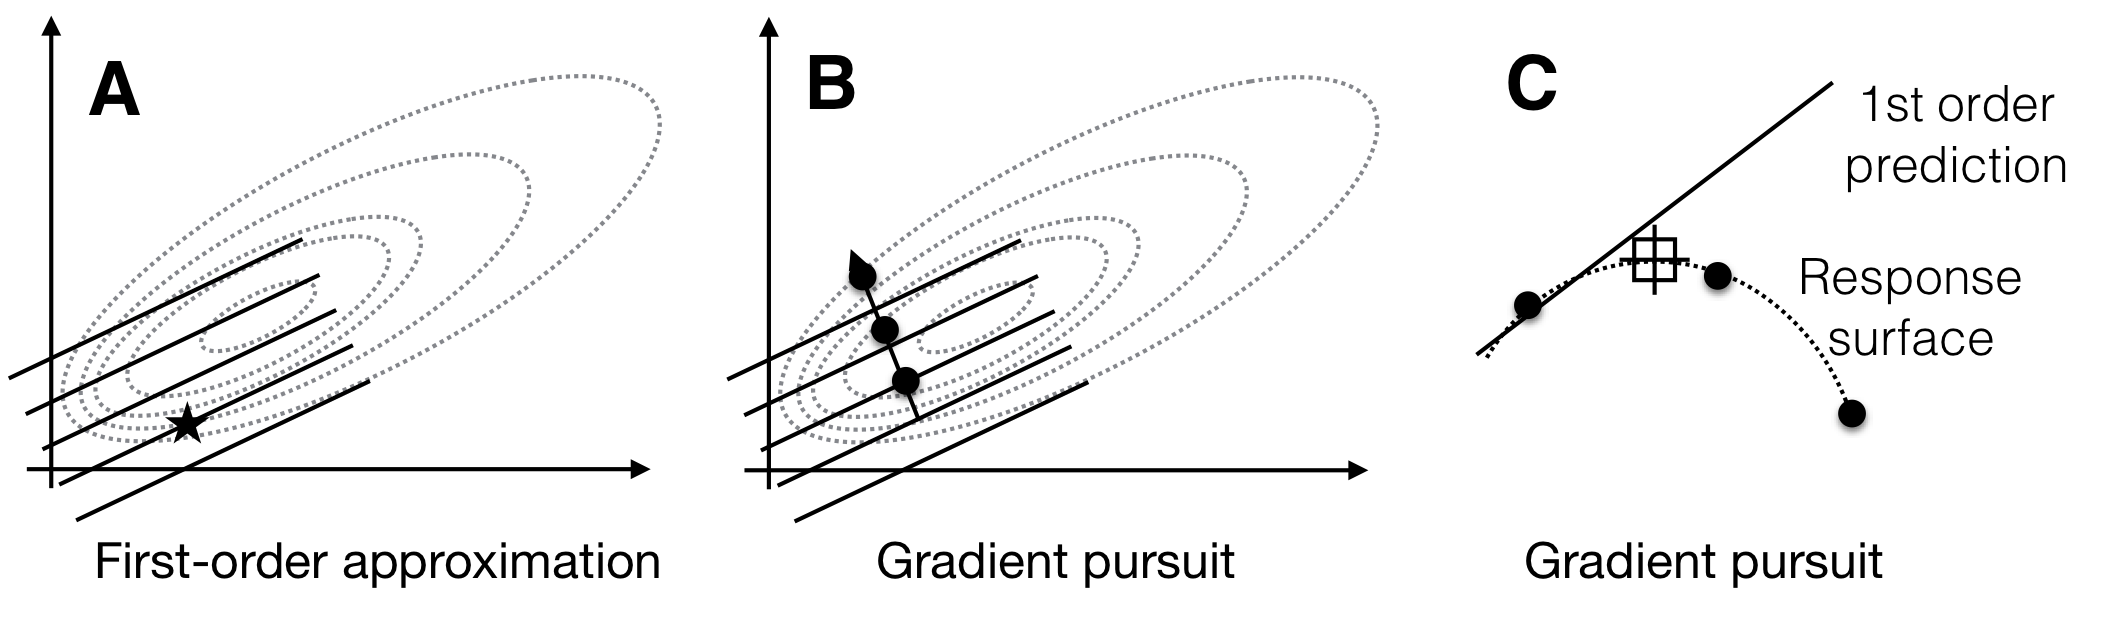 Sequential response surface experiment with first-order model. A: The first-order model (solid lines) build around a starting condition (star) approximates the true response surface (dotted lines) only locally. B: The gradient follows the increase of the plane and predicts indefinite increase in response. C: The first-order approximation (solid line) deteriorates from the true surface (dotted line) at larger distances from the starting condition, and the measured responses (points) start to decrease.